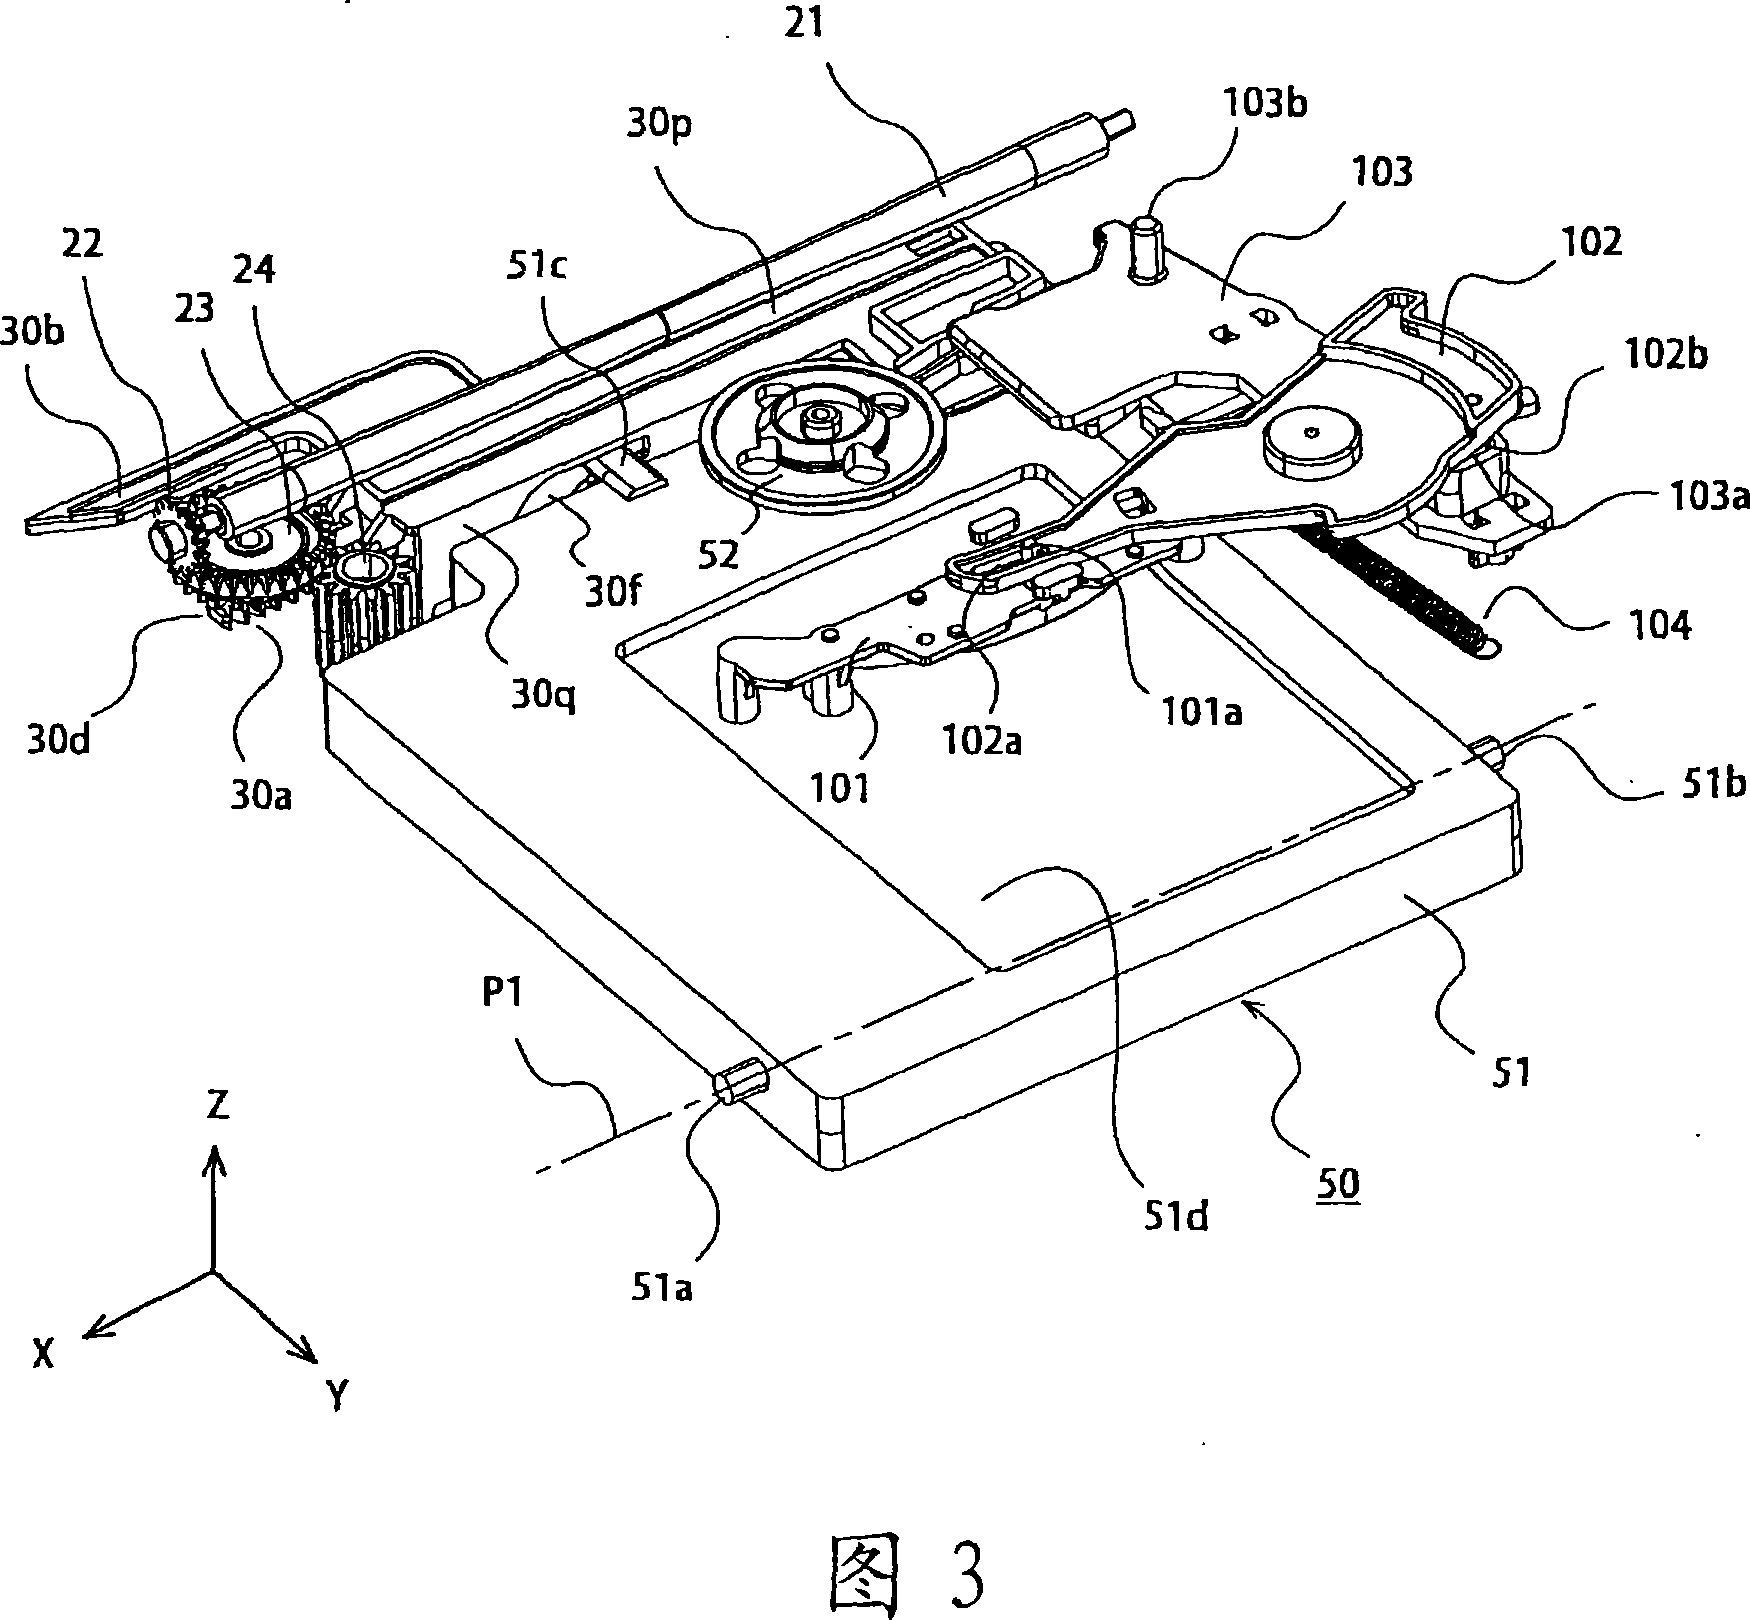 Disk device and disk loading mechanism